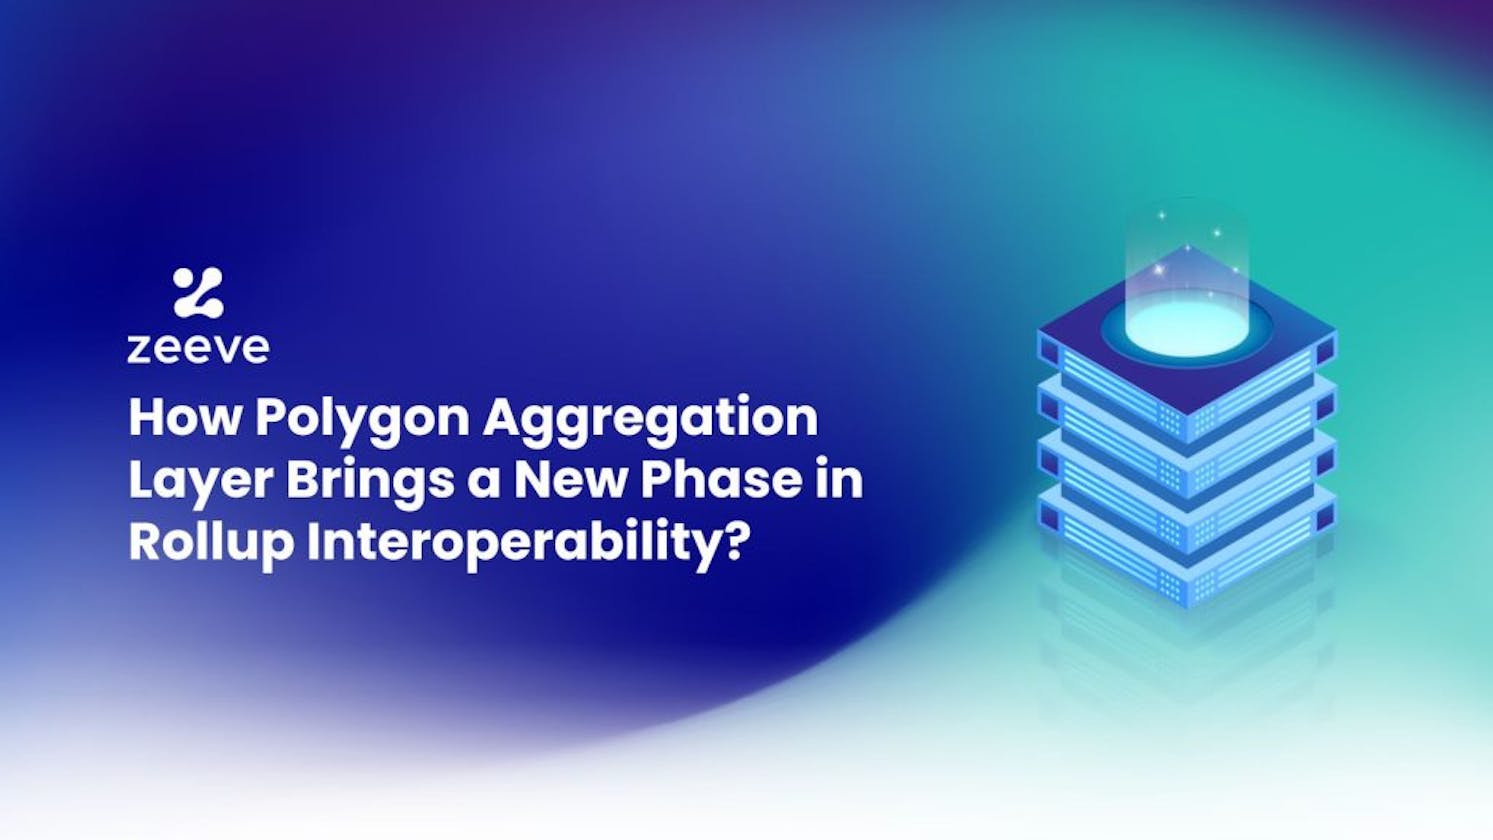 How Polygon’s Aggregation Layer Brings a New Phase in Rollup Interoperability?